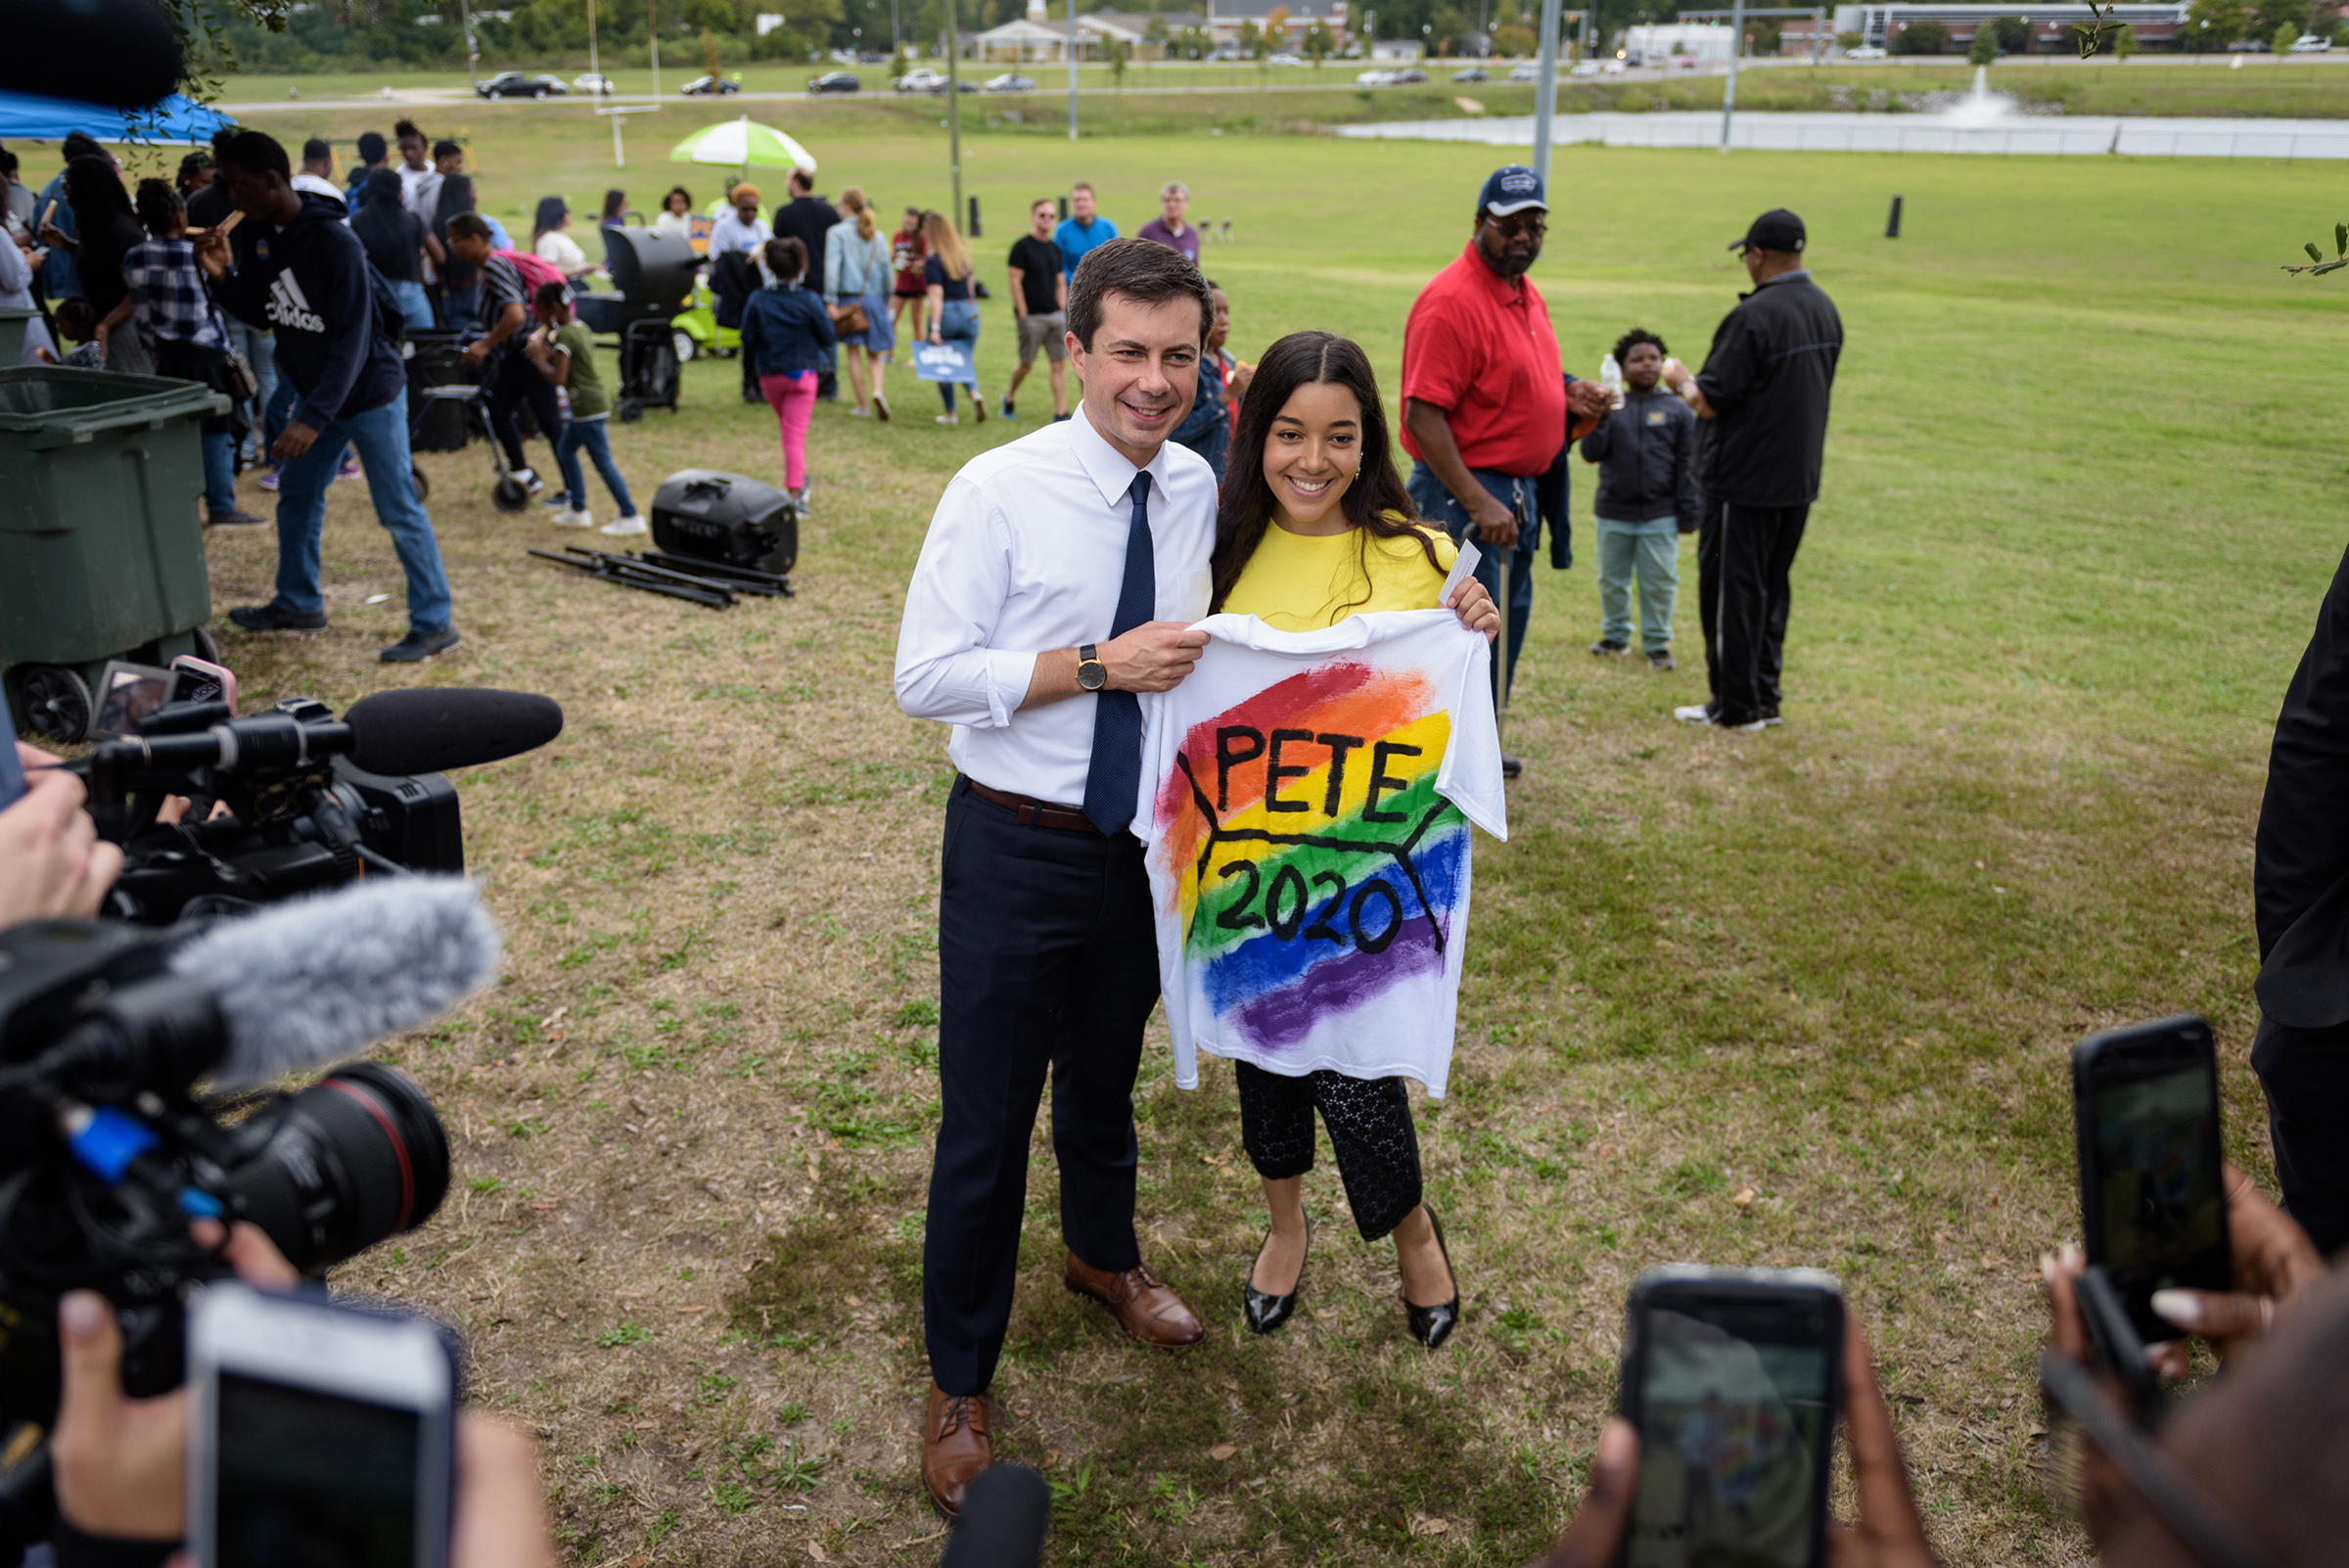 Mayor Pete Buttigieg of South Bend, Ind. poses for a photo with Kashmir Imani, holding a T-shirt she designed, during a homecoming tailgate event at Allen University, a historically black campus in Columbia, S.C., on Oct. 26, 2019. (Bryan Cereijo—The New York Times/Redux)